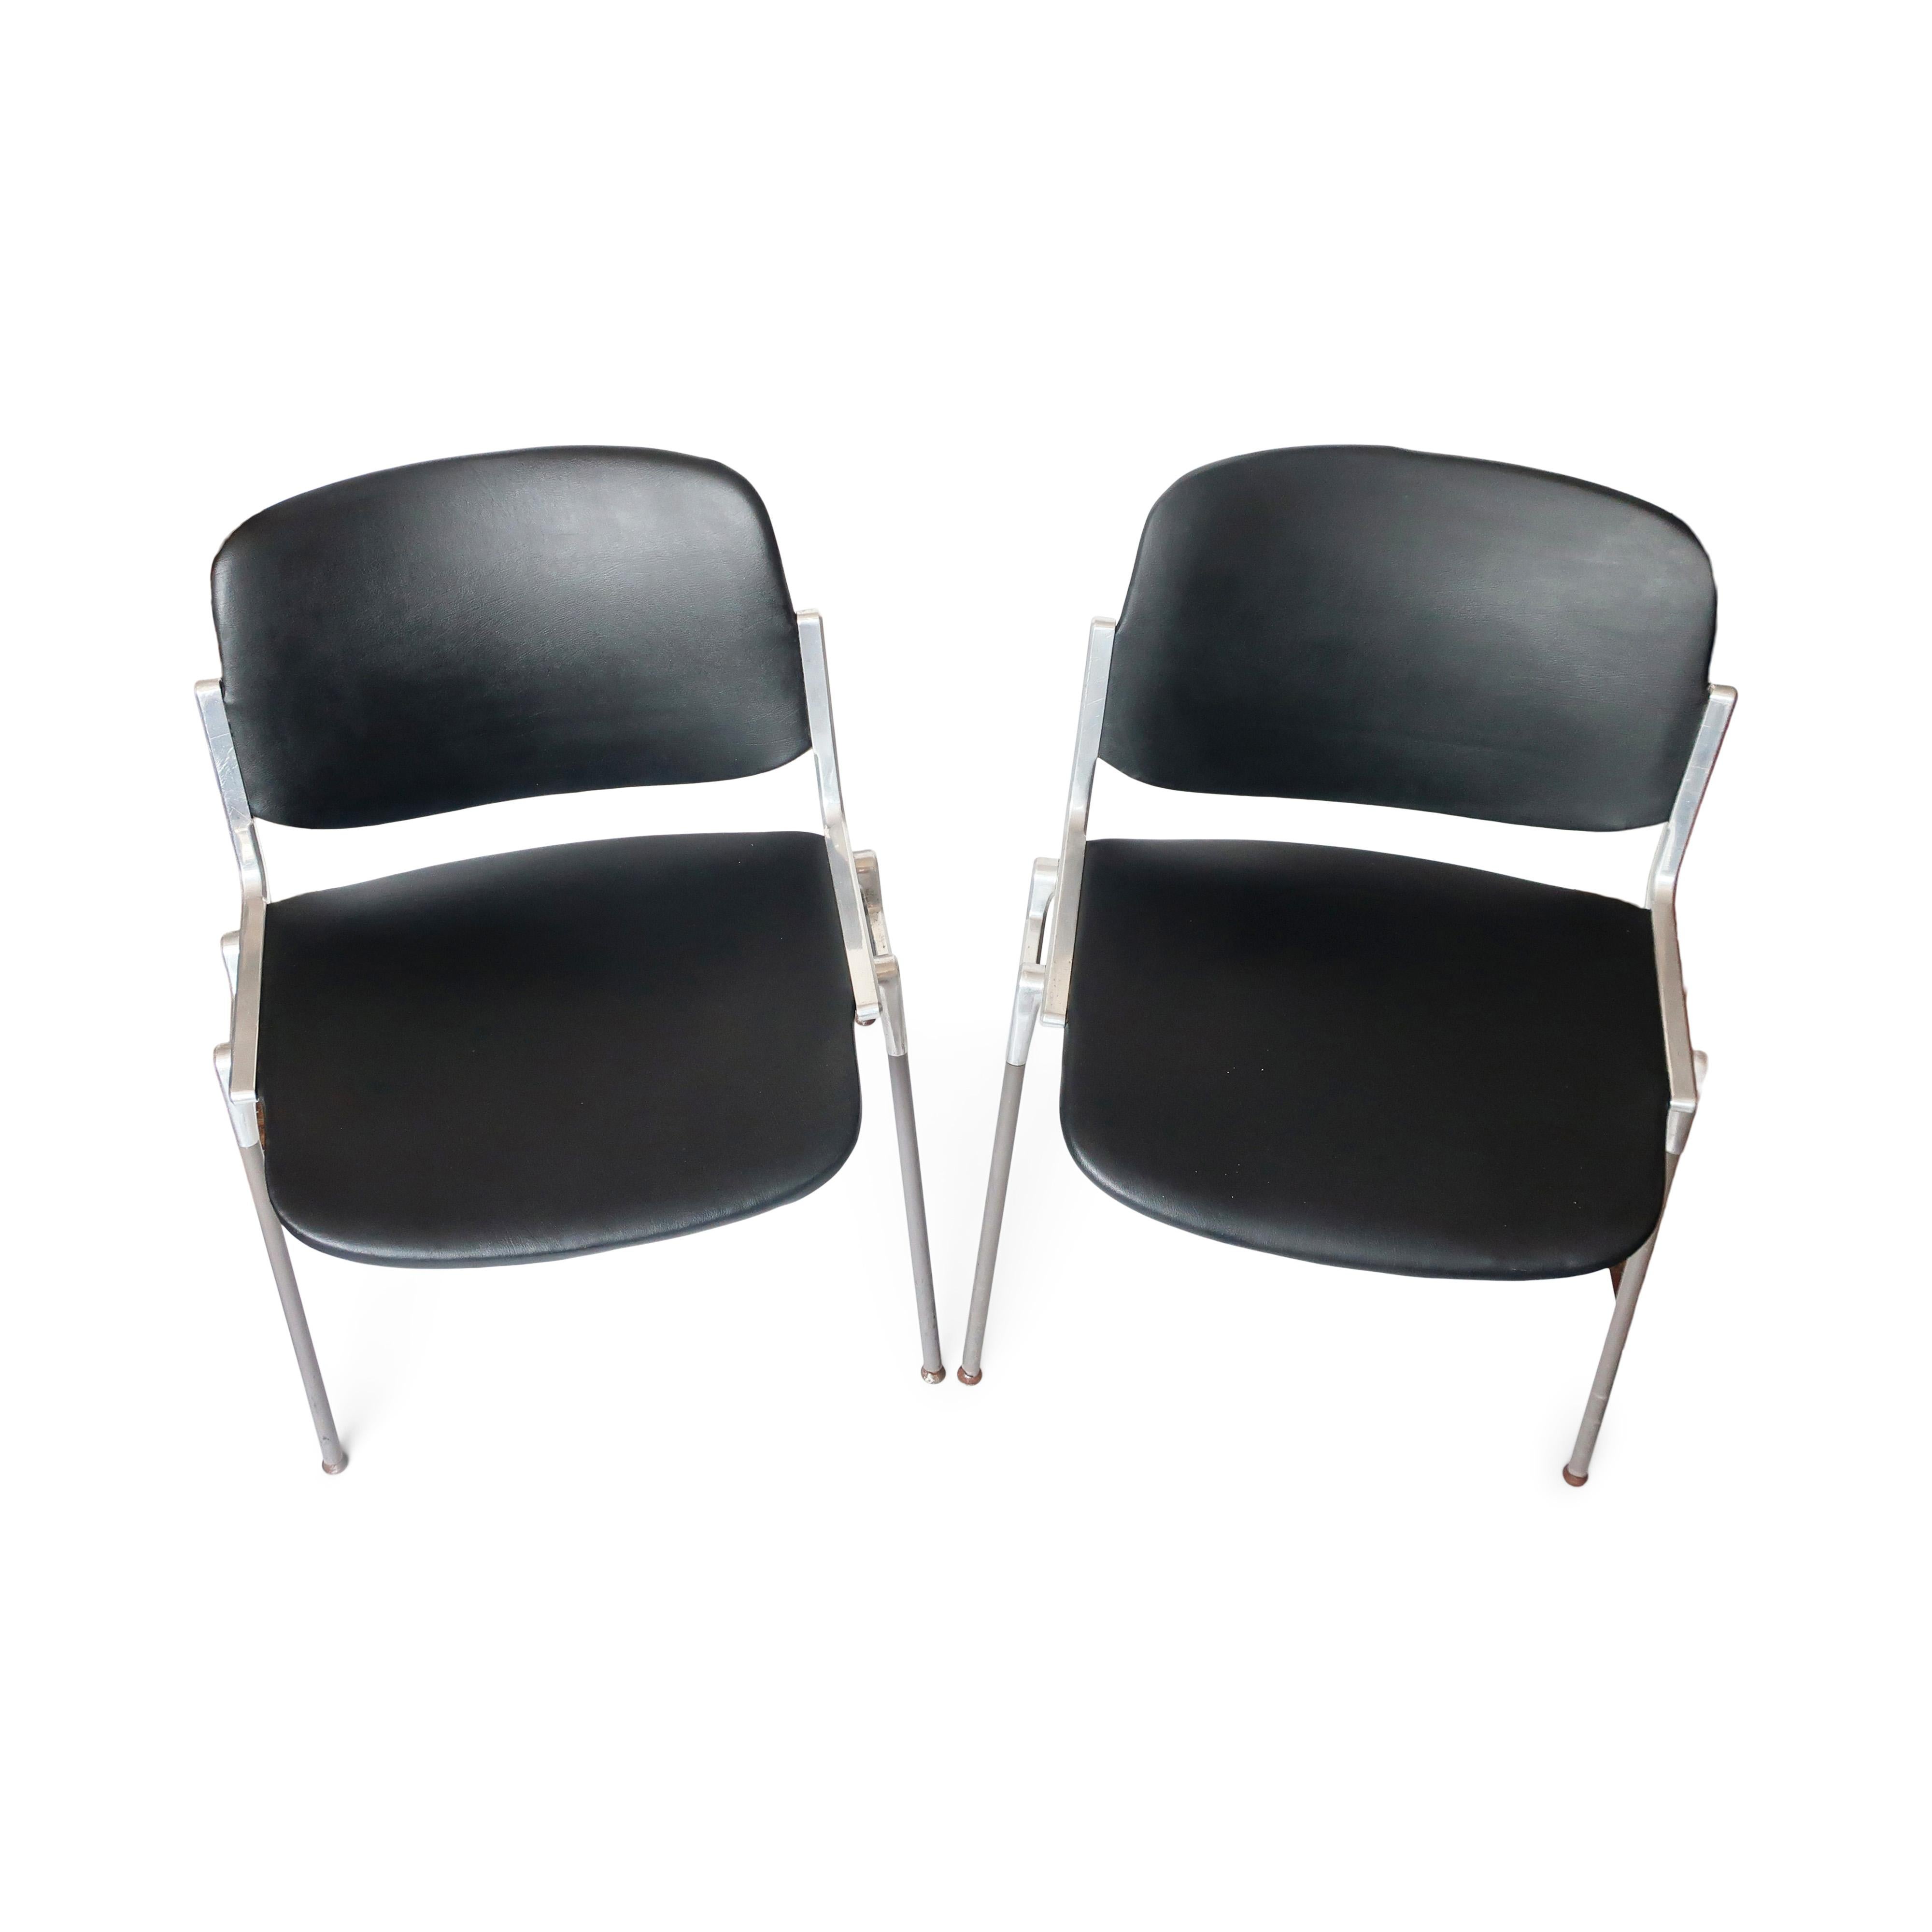 20th Century Pair of DSC 106 Chairs by Giancarlo Piretti for Castelli